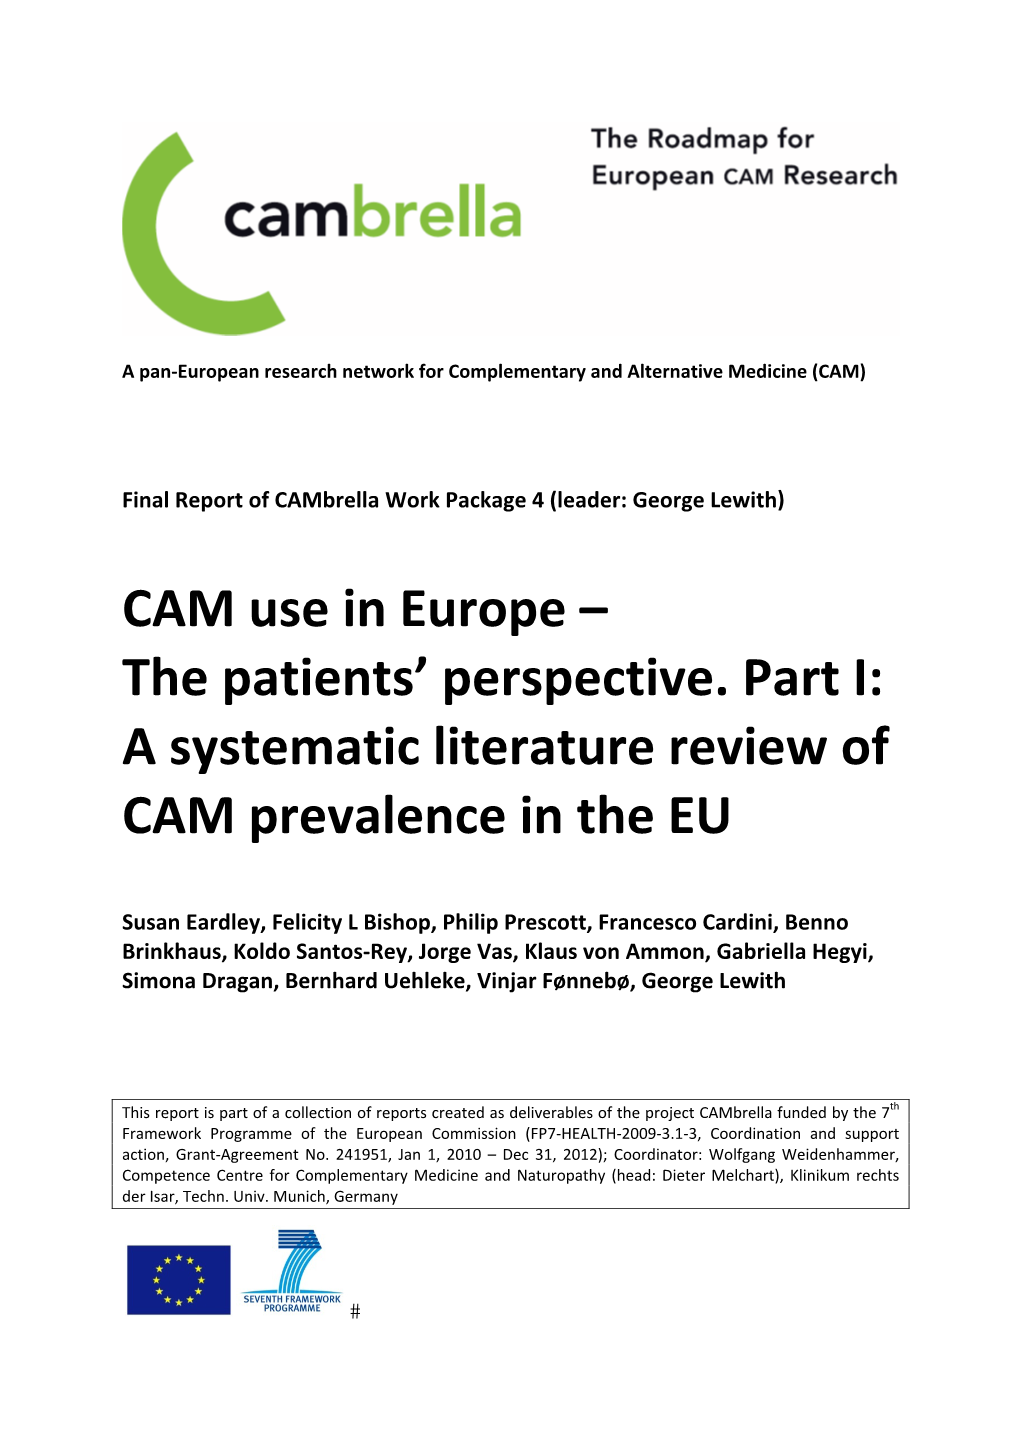 A Systematic Literature Review of CAM Prevalence in the EU